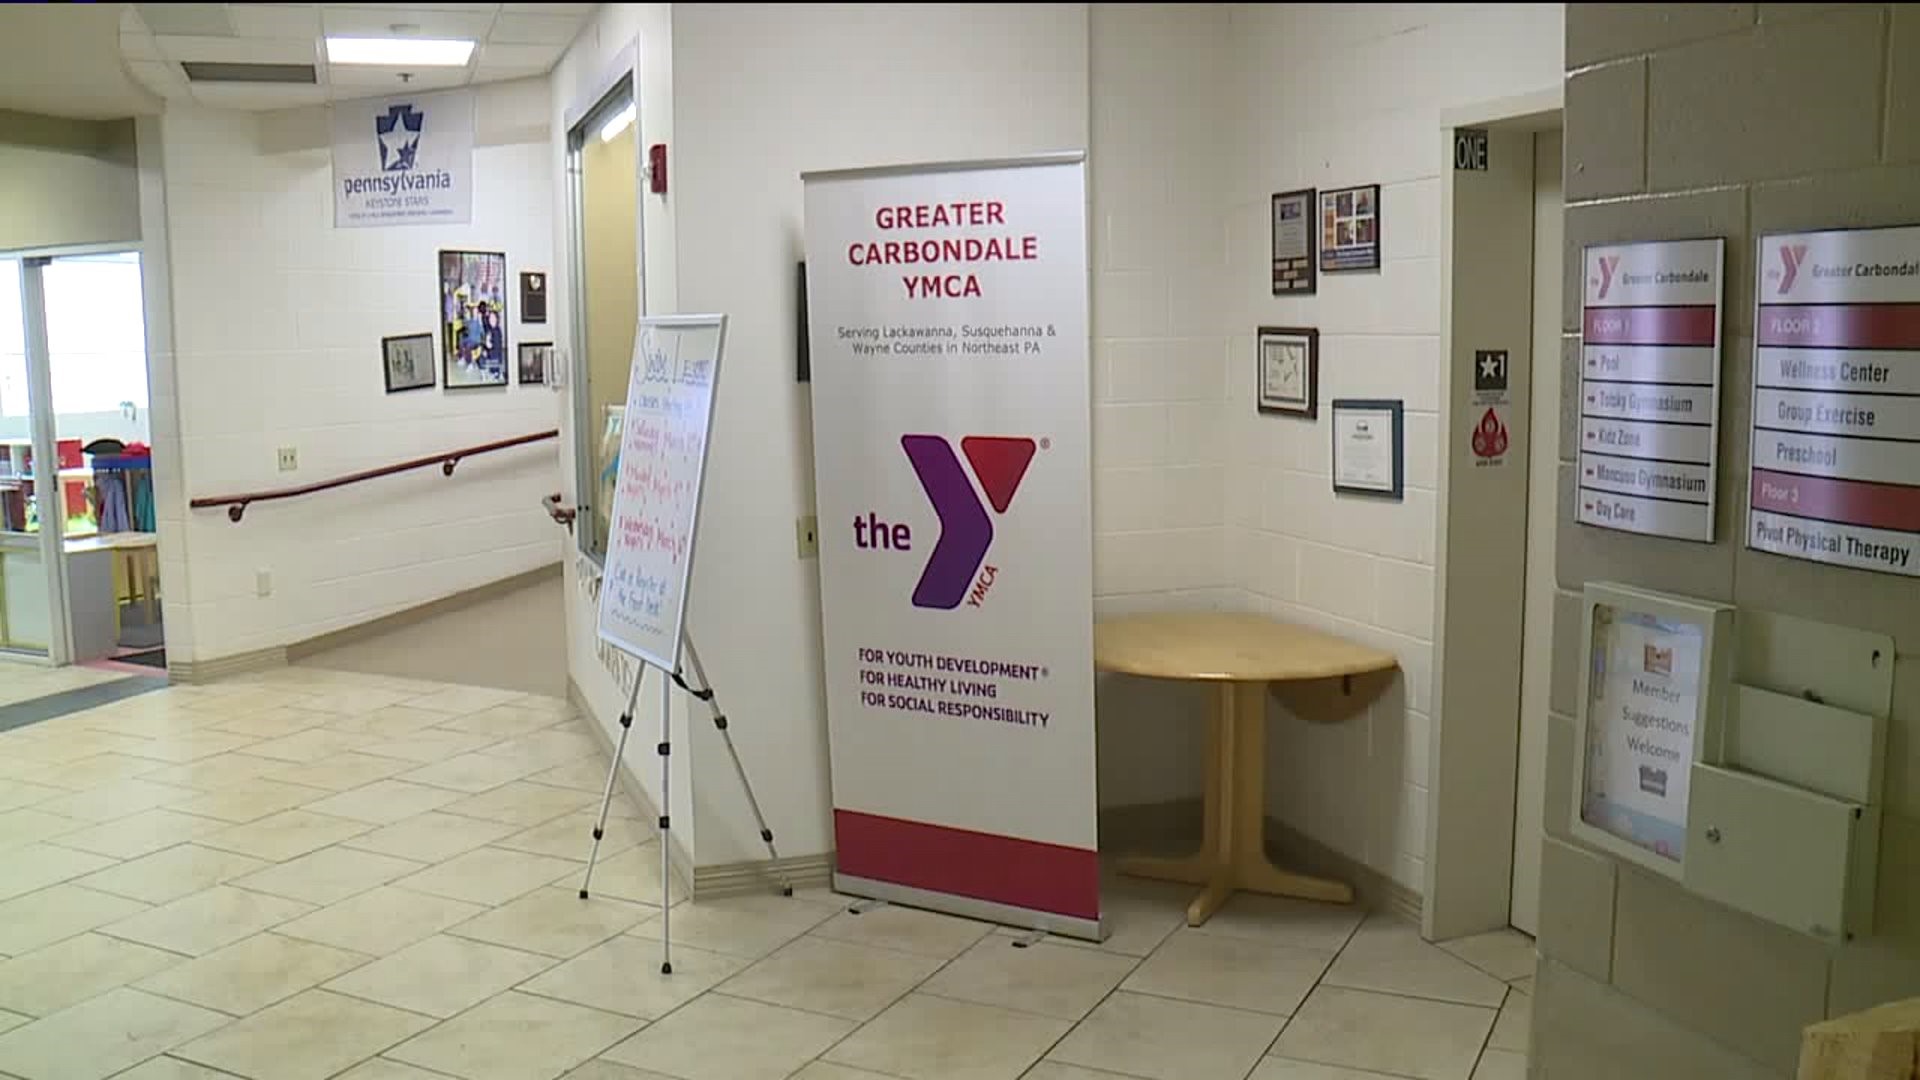 State Money Funds Expansion at Greater Carbondale YMCA